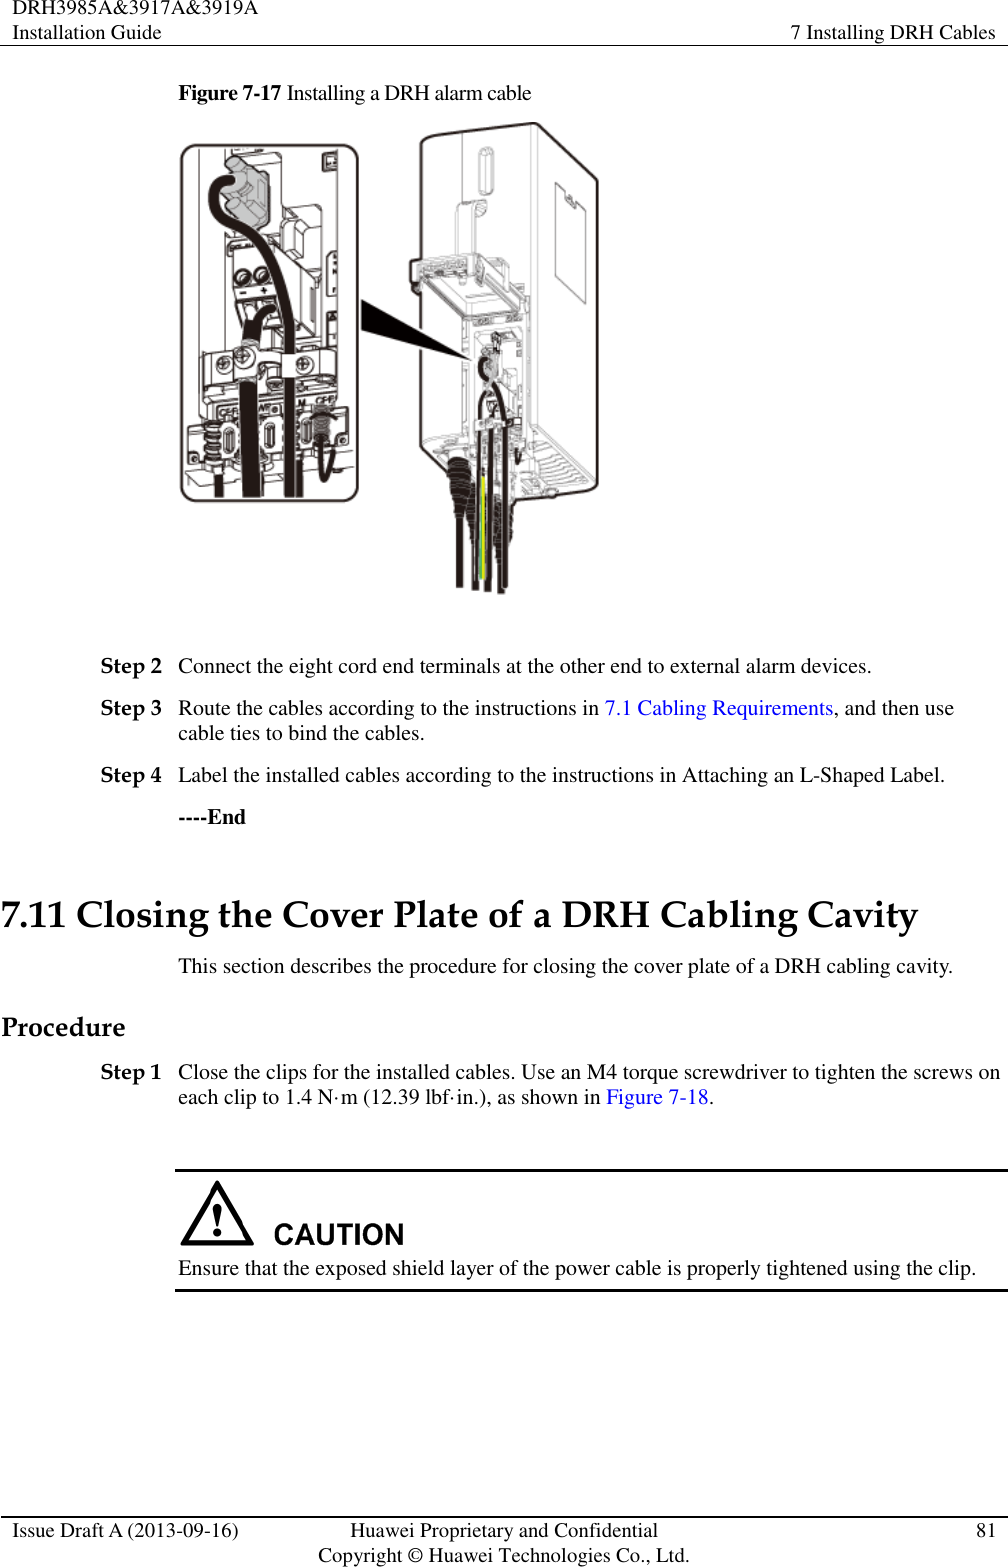 DRH3985A&amp;3917A&amp;3919A Installation Guide 7 Installing DRH Cables  Issue Draft A (2013-09-16) Huawei Proprietary and Confidential                                     Copyright © Huawei Technologies Co., Ltd. 81  Figure 7-17 Installing a DRH alarm cable   Step 2 Connect the eight cord end terminals at the other end to external alarm devices. Step 3 Route the cables according to the instructions in 7.1 Cabling Requirements, and then use cable ties to bind the cables. Step 4 Label the installed cables according to the instructions in Attaching an L-Shaped Label. ----End 7.11 Closing the Cover Plate of a DRH Cabling Cavity This section describes the procedure for closing the cover plate of a DRH cabling cavity. Procedure Step 1 Close the clips for the installed cables. Use an M4 torque screwdriver to tighten the screws on each clip to 1.4 N·m (12.39 lbf·in.), as shown in Figure 7-18.   Ensure that the exposed shield layer of the power cable is properly tightened using the clip.  